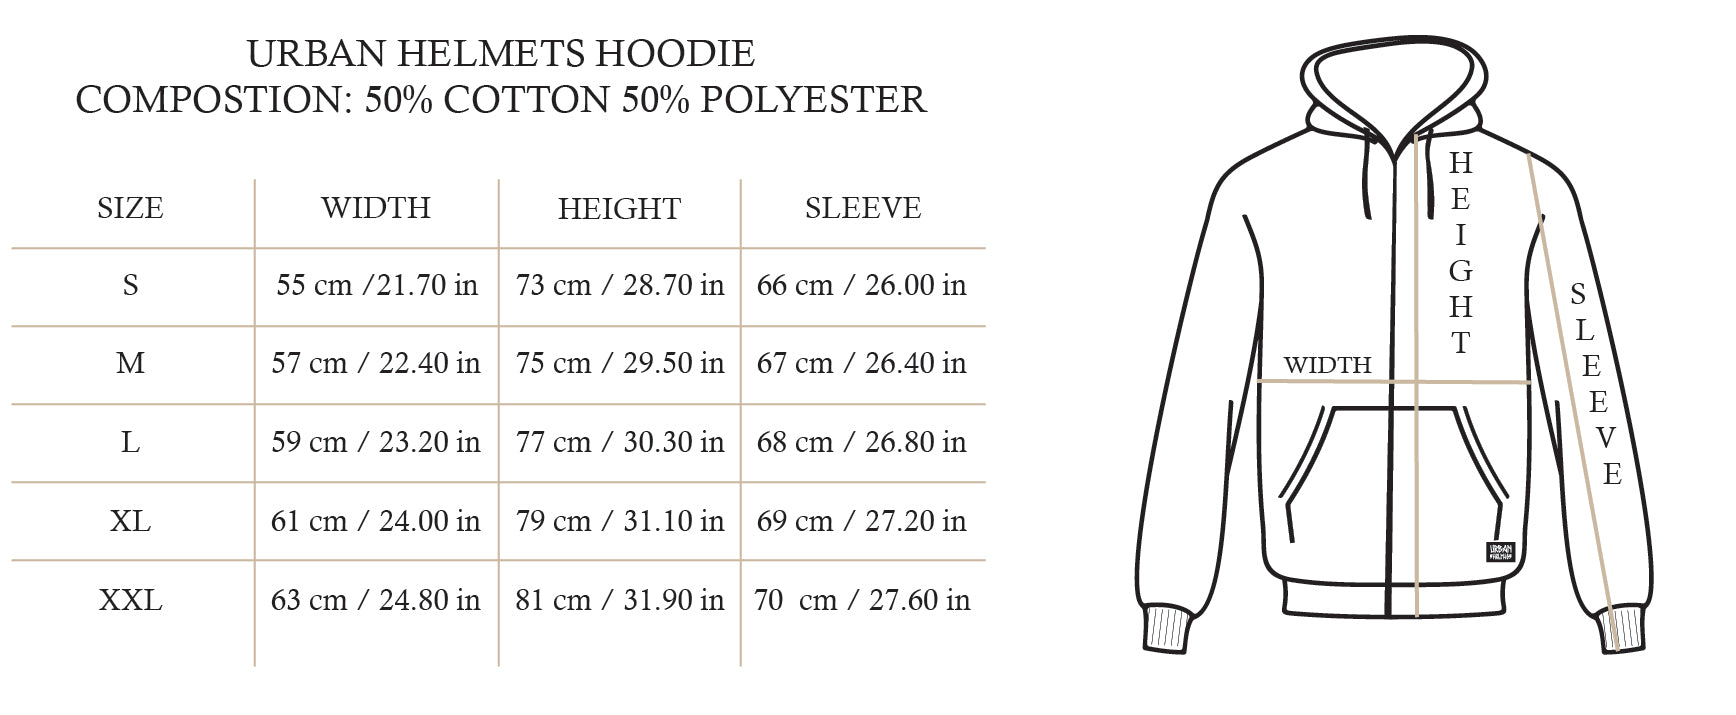 hoodie-size-guide